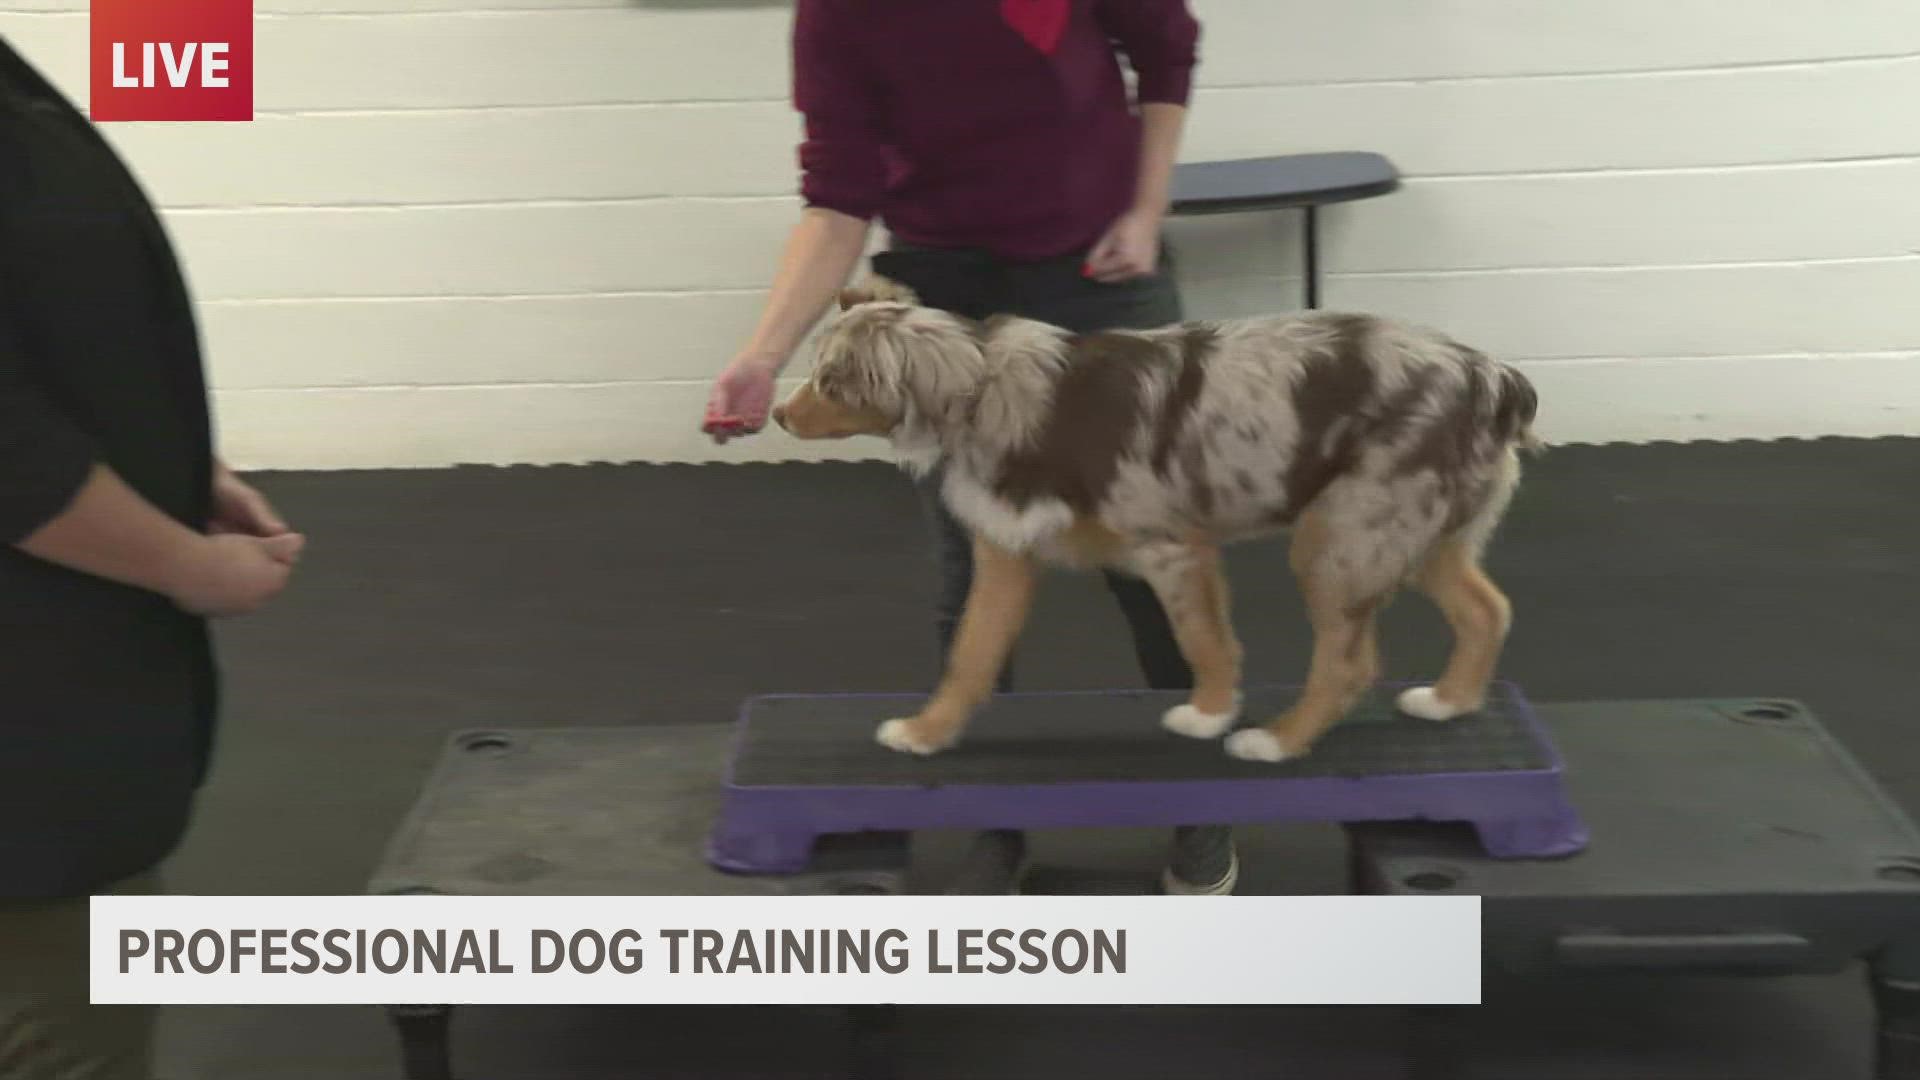 Training is an essential part of owning a dog that can start at any age.